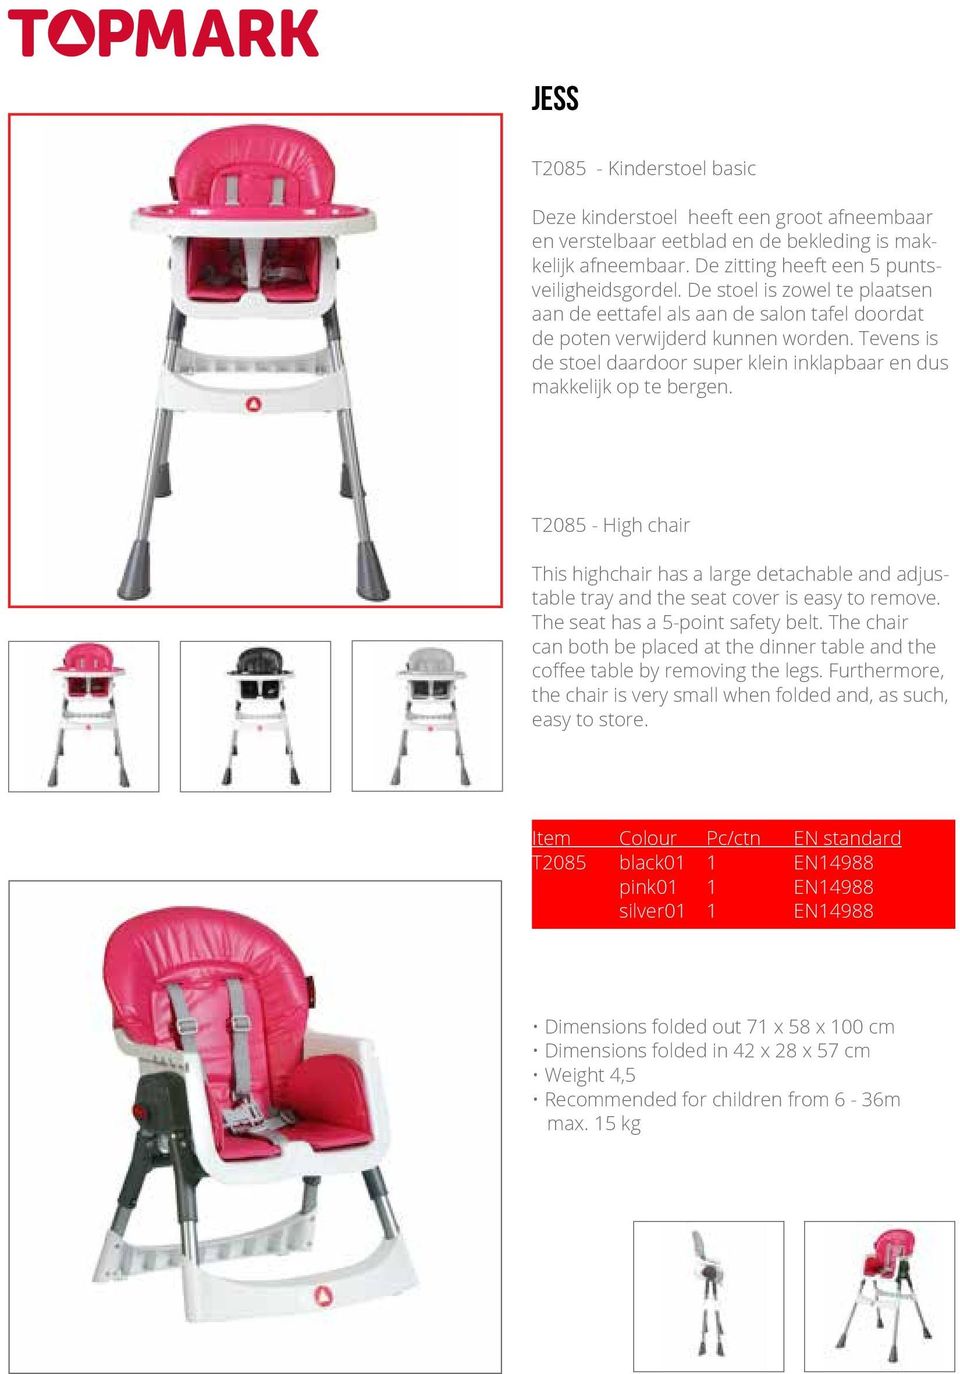 T2085 - High chair This highchair has a large detachable and adjustable tray and the seat cover is easy to remove. The seat has a 5-point safety belt.